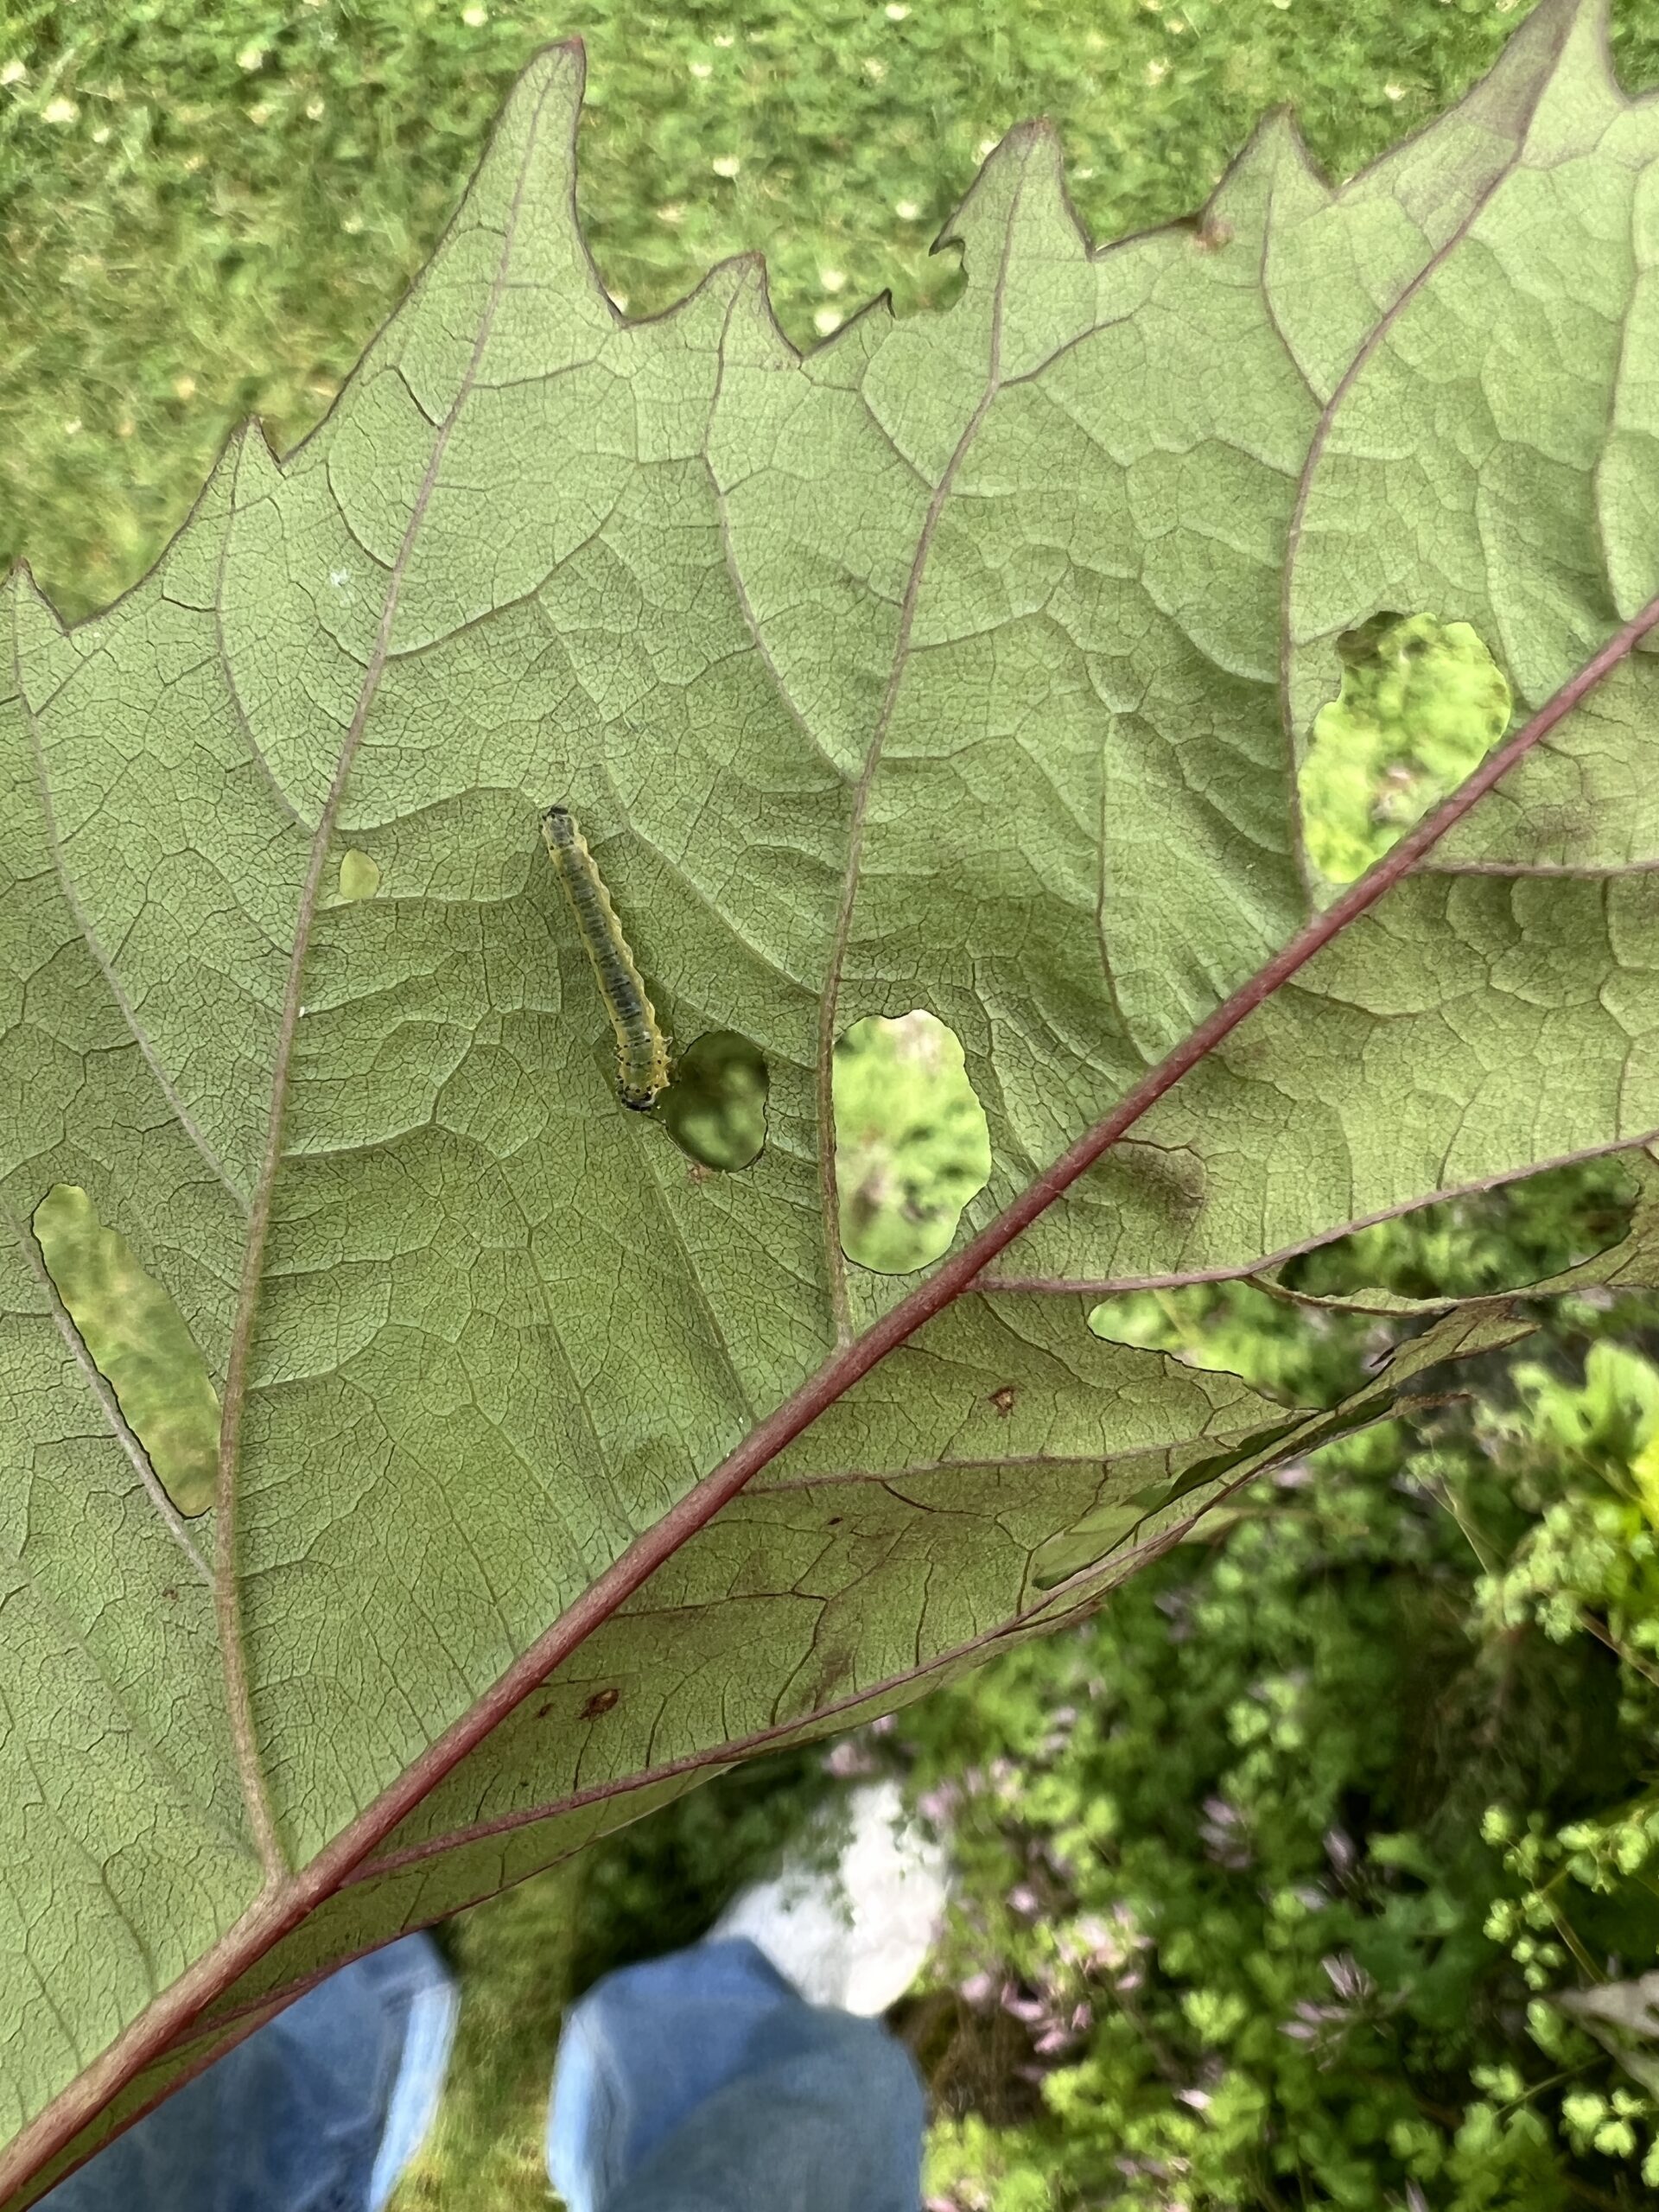 The larvae or caterpillar of the Hibiscus sawfly begins chewing the foliage on the underside.  As the caterpillar gets older it will feed on both the top and bottom of the leaves. ANDREW MESSINGER